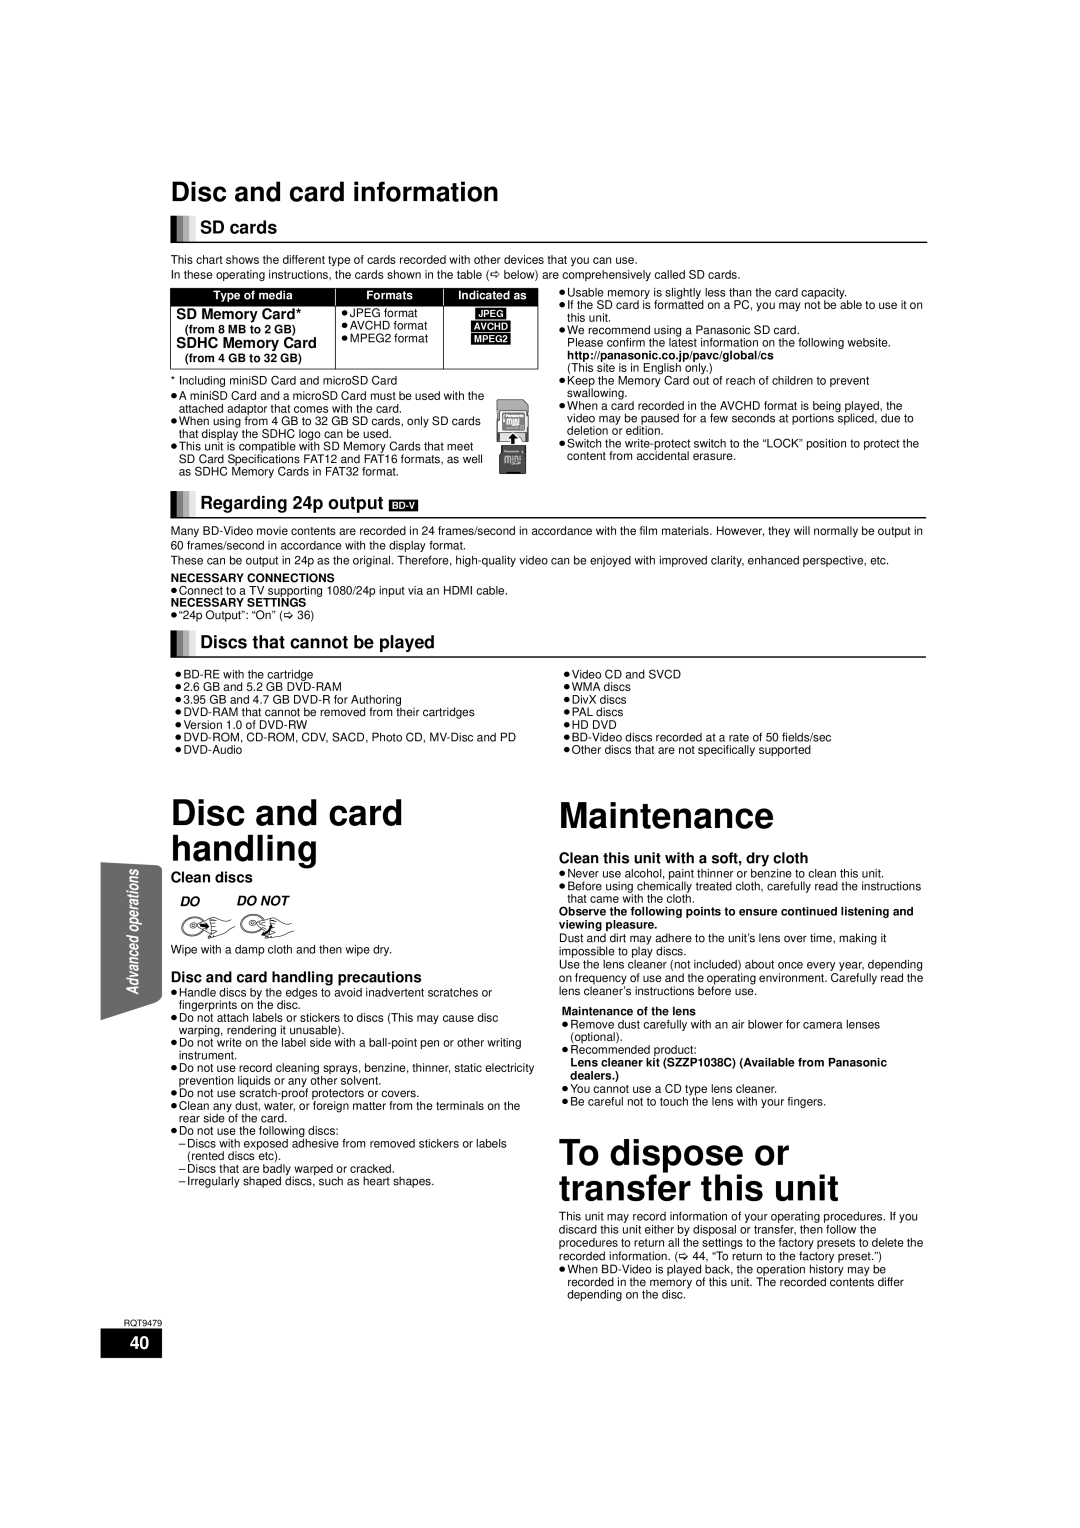 Panasonic SA-BTX70 Disc and card handling, Maintenance, To dispose or transfer this unit, Disc and card information 